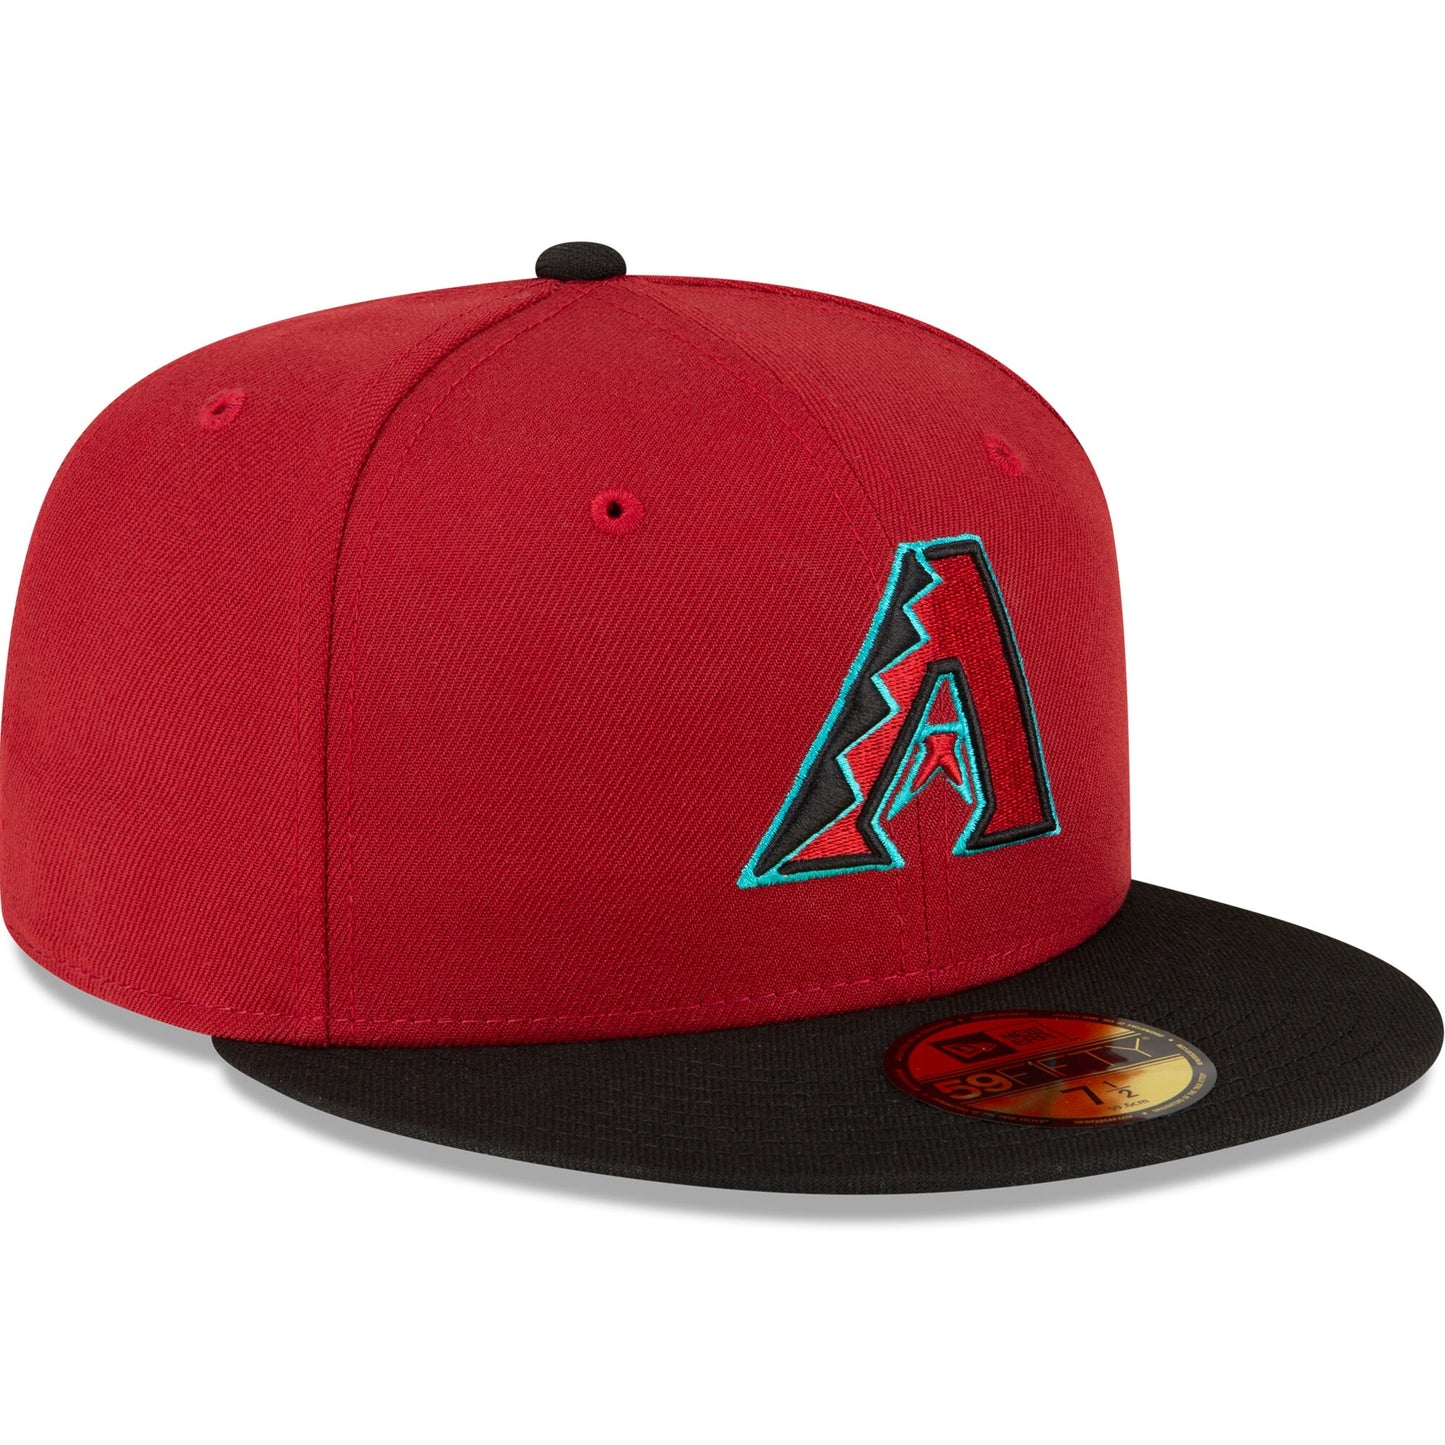 Men's Arizona Diamondbacks New Era Red/Black Home Authentic Collection On-Field 59FIFTY Fitted Hat